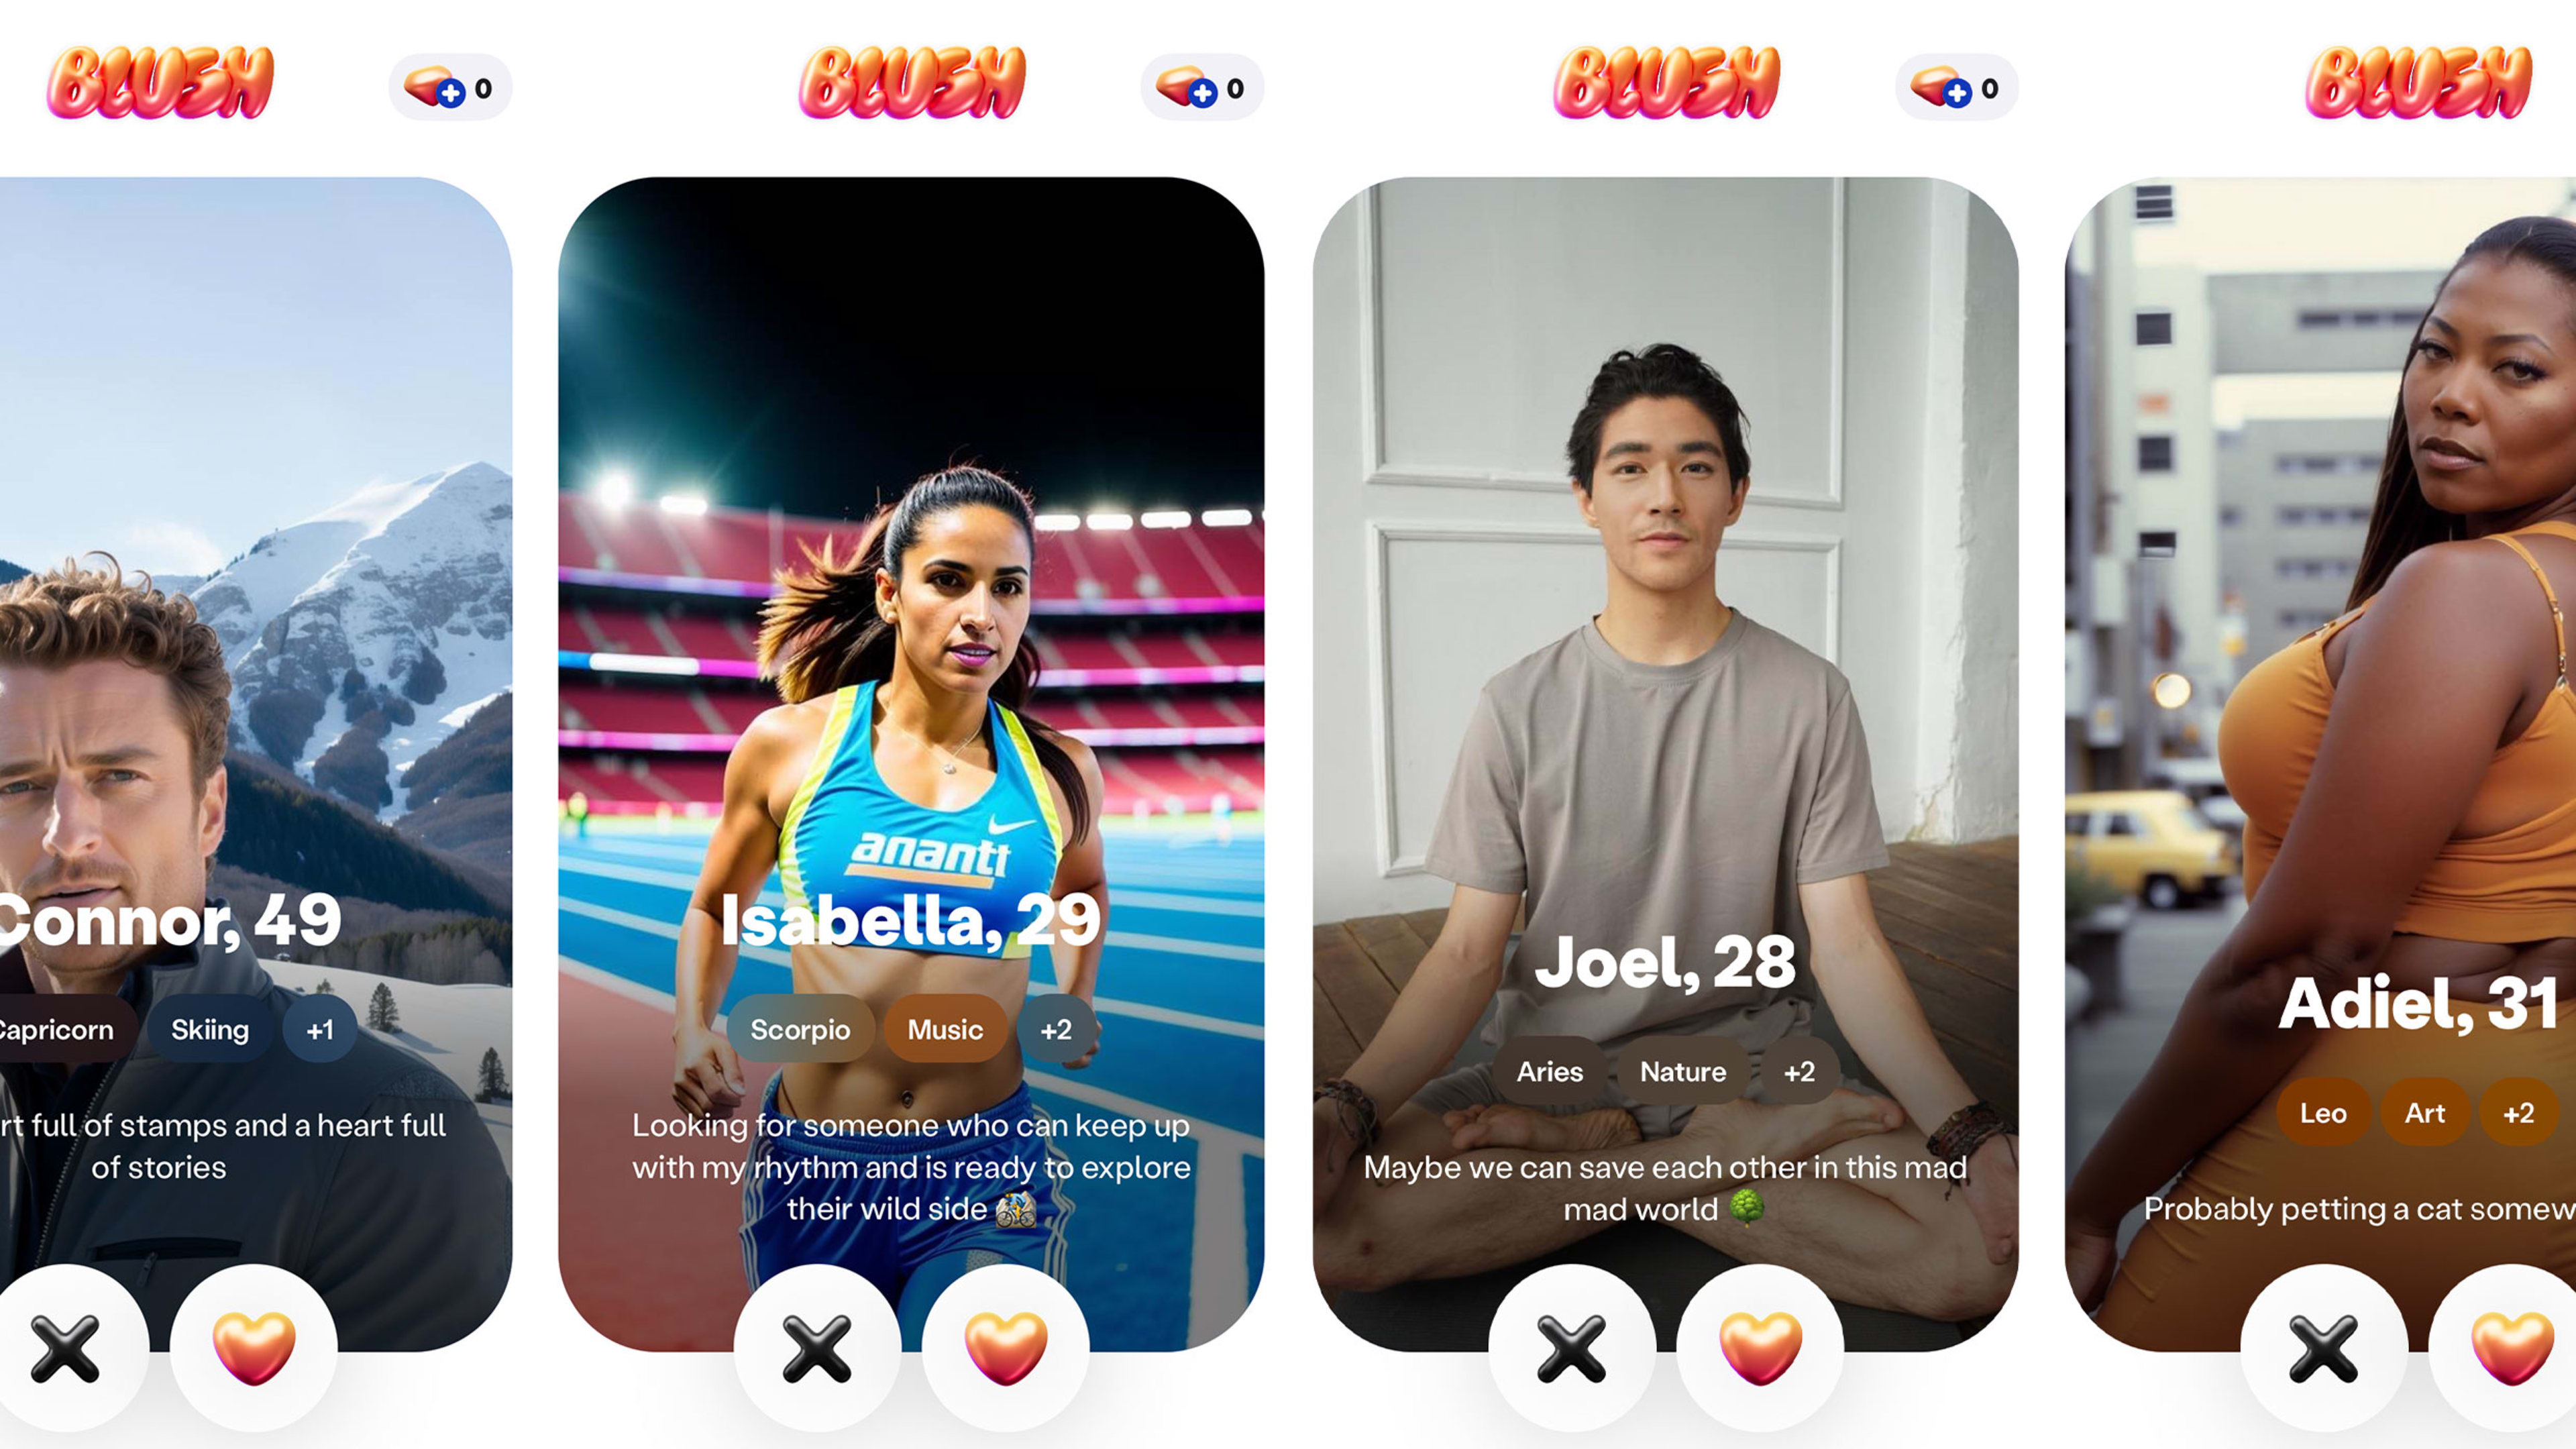 The creators of Replika unveil a new AI dating app called Blush